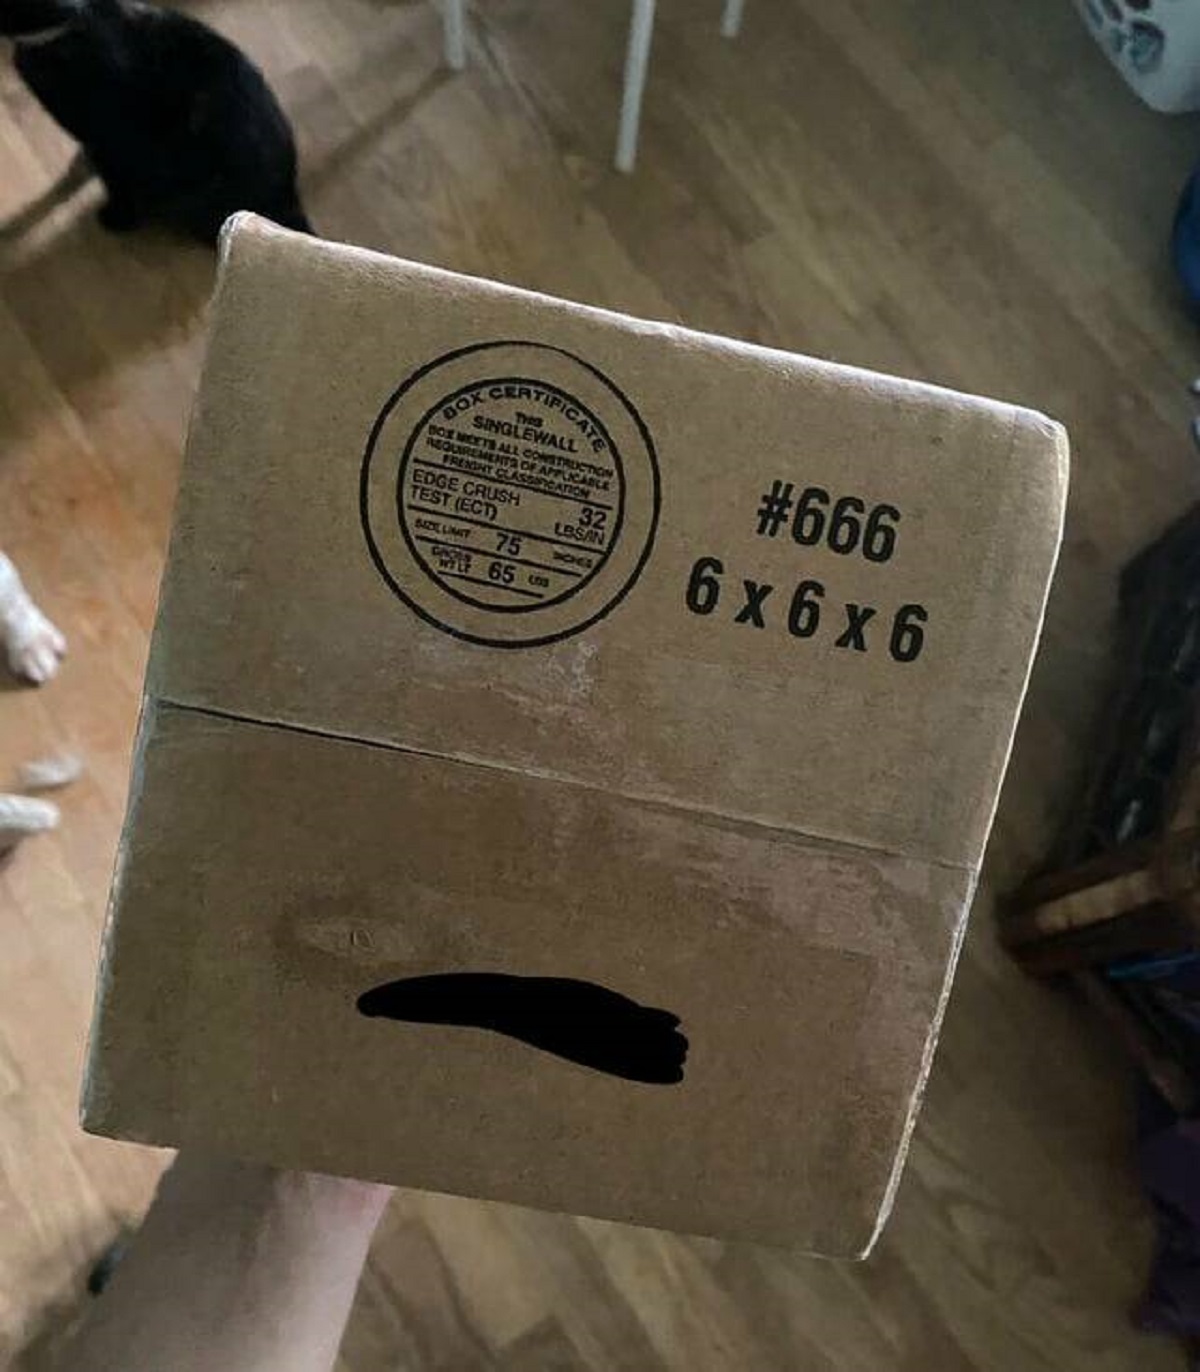 "I got a mysterious package today that’s 6x6x6 inches with the #666"